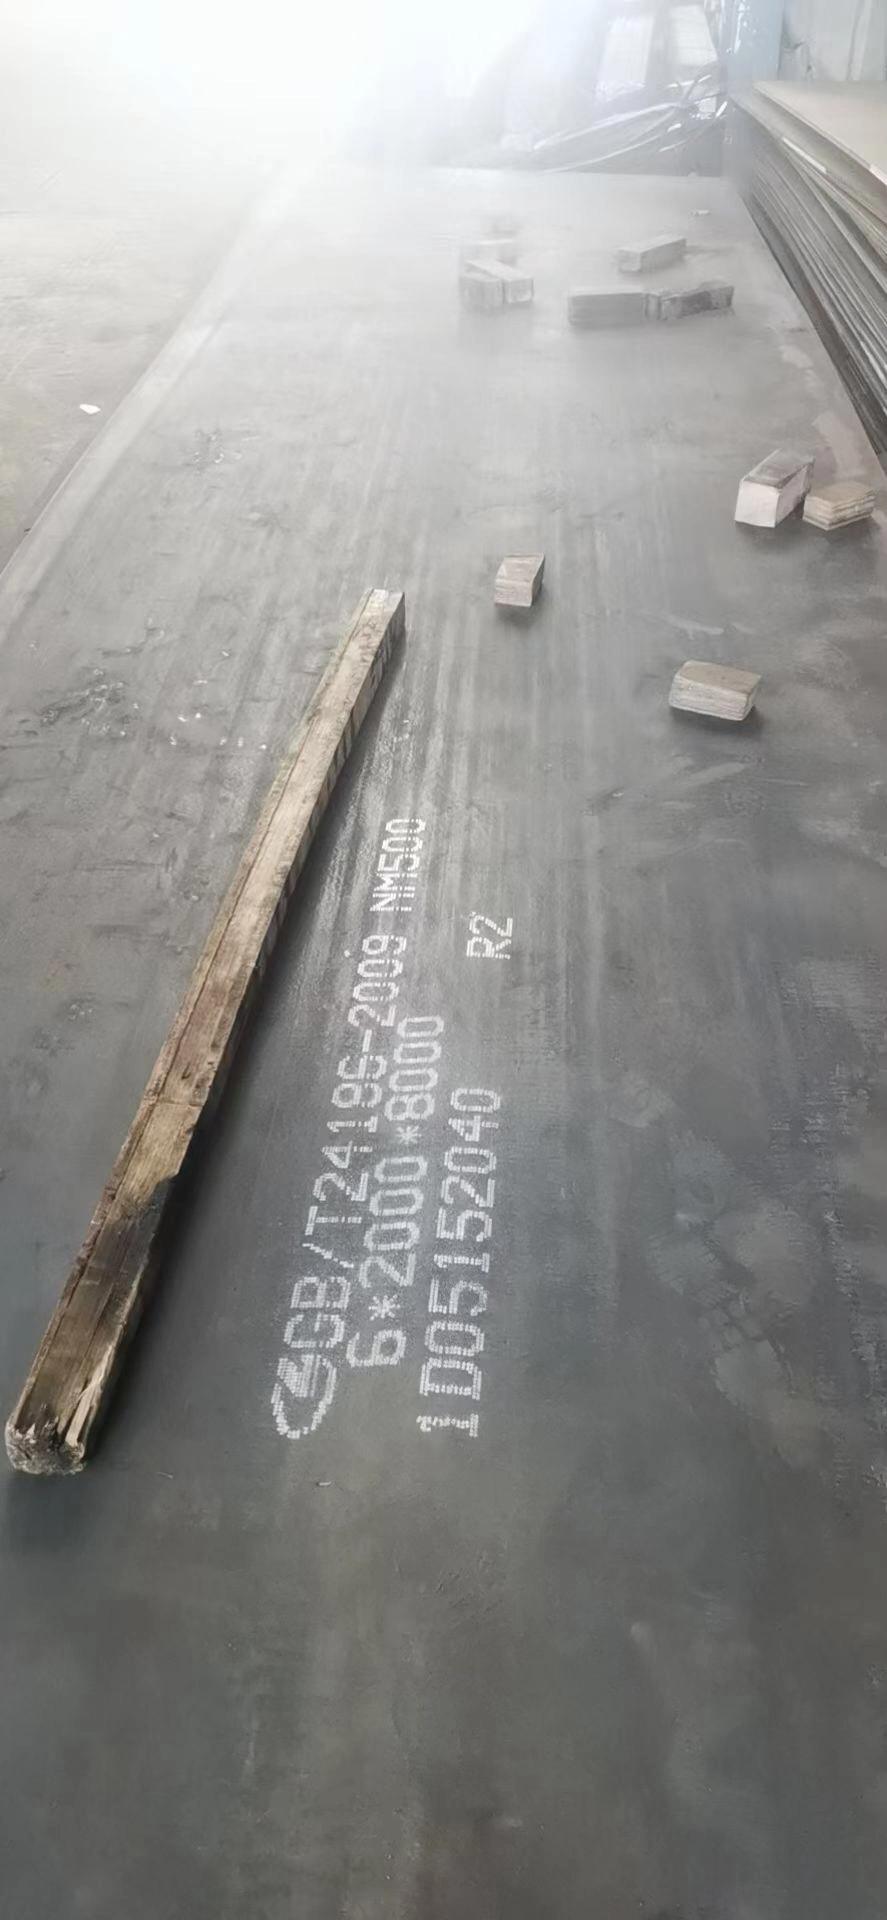 Ar Steel Plate Hard550 Steel Plate Hard500 Plate Quenched and Tempered Wear Resistant Steel Plate Manufacturer High Nm500 Abrasion Resistant Steel Sheet